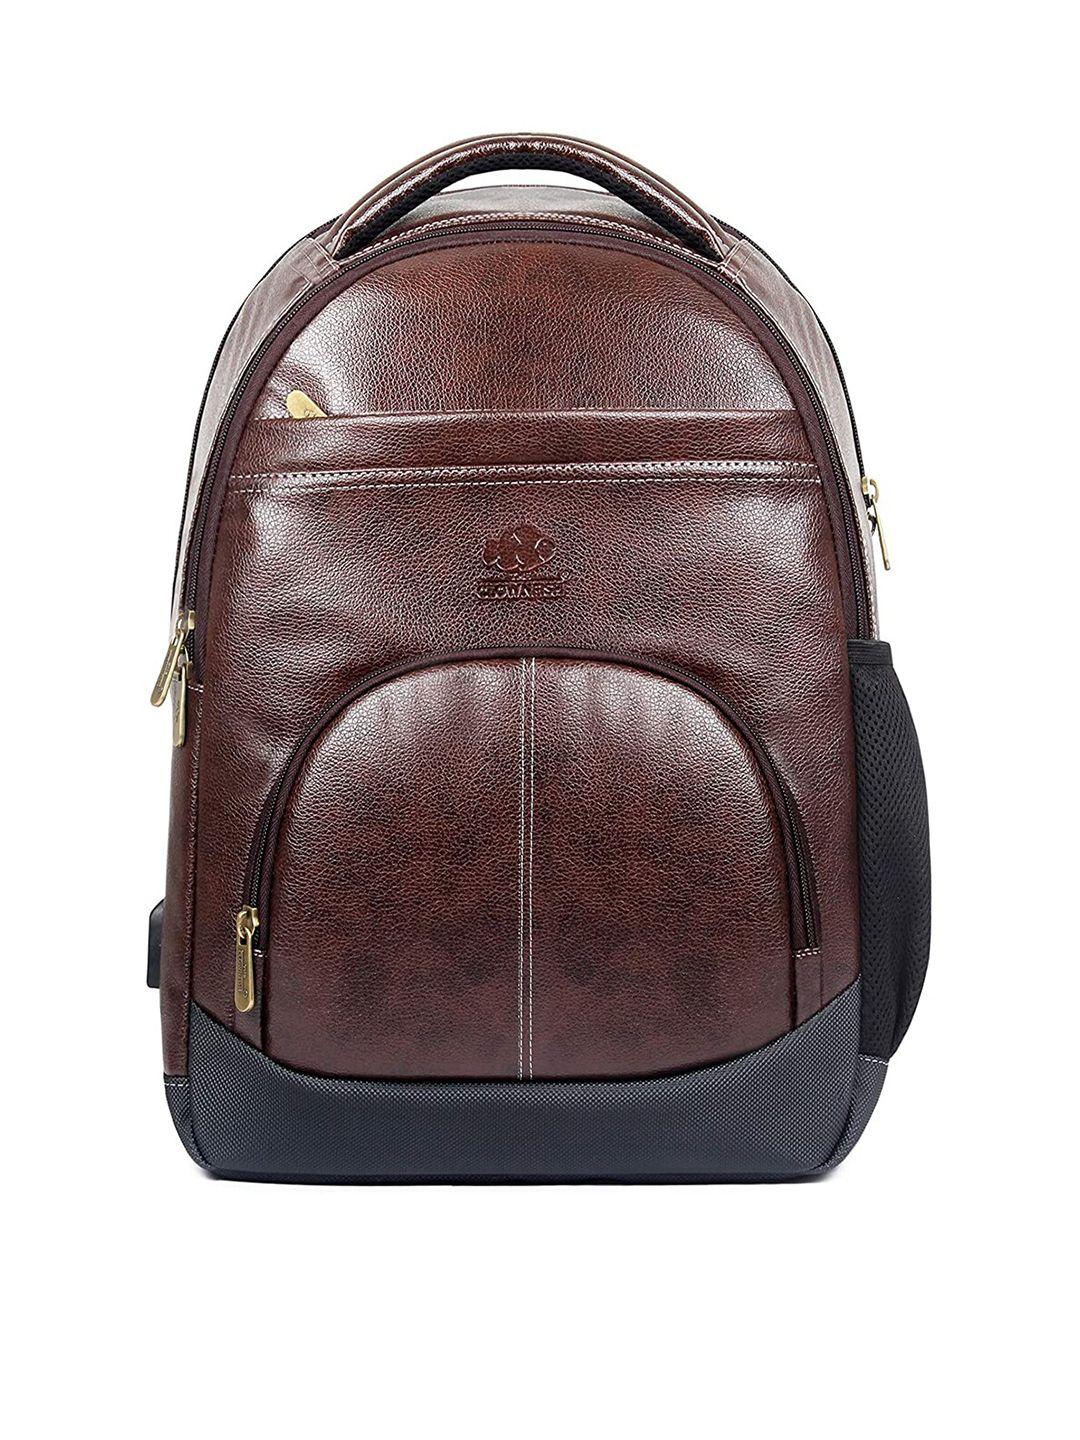 the clownfish unisex brown & black backpack